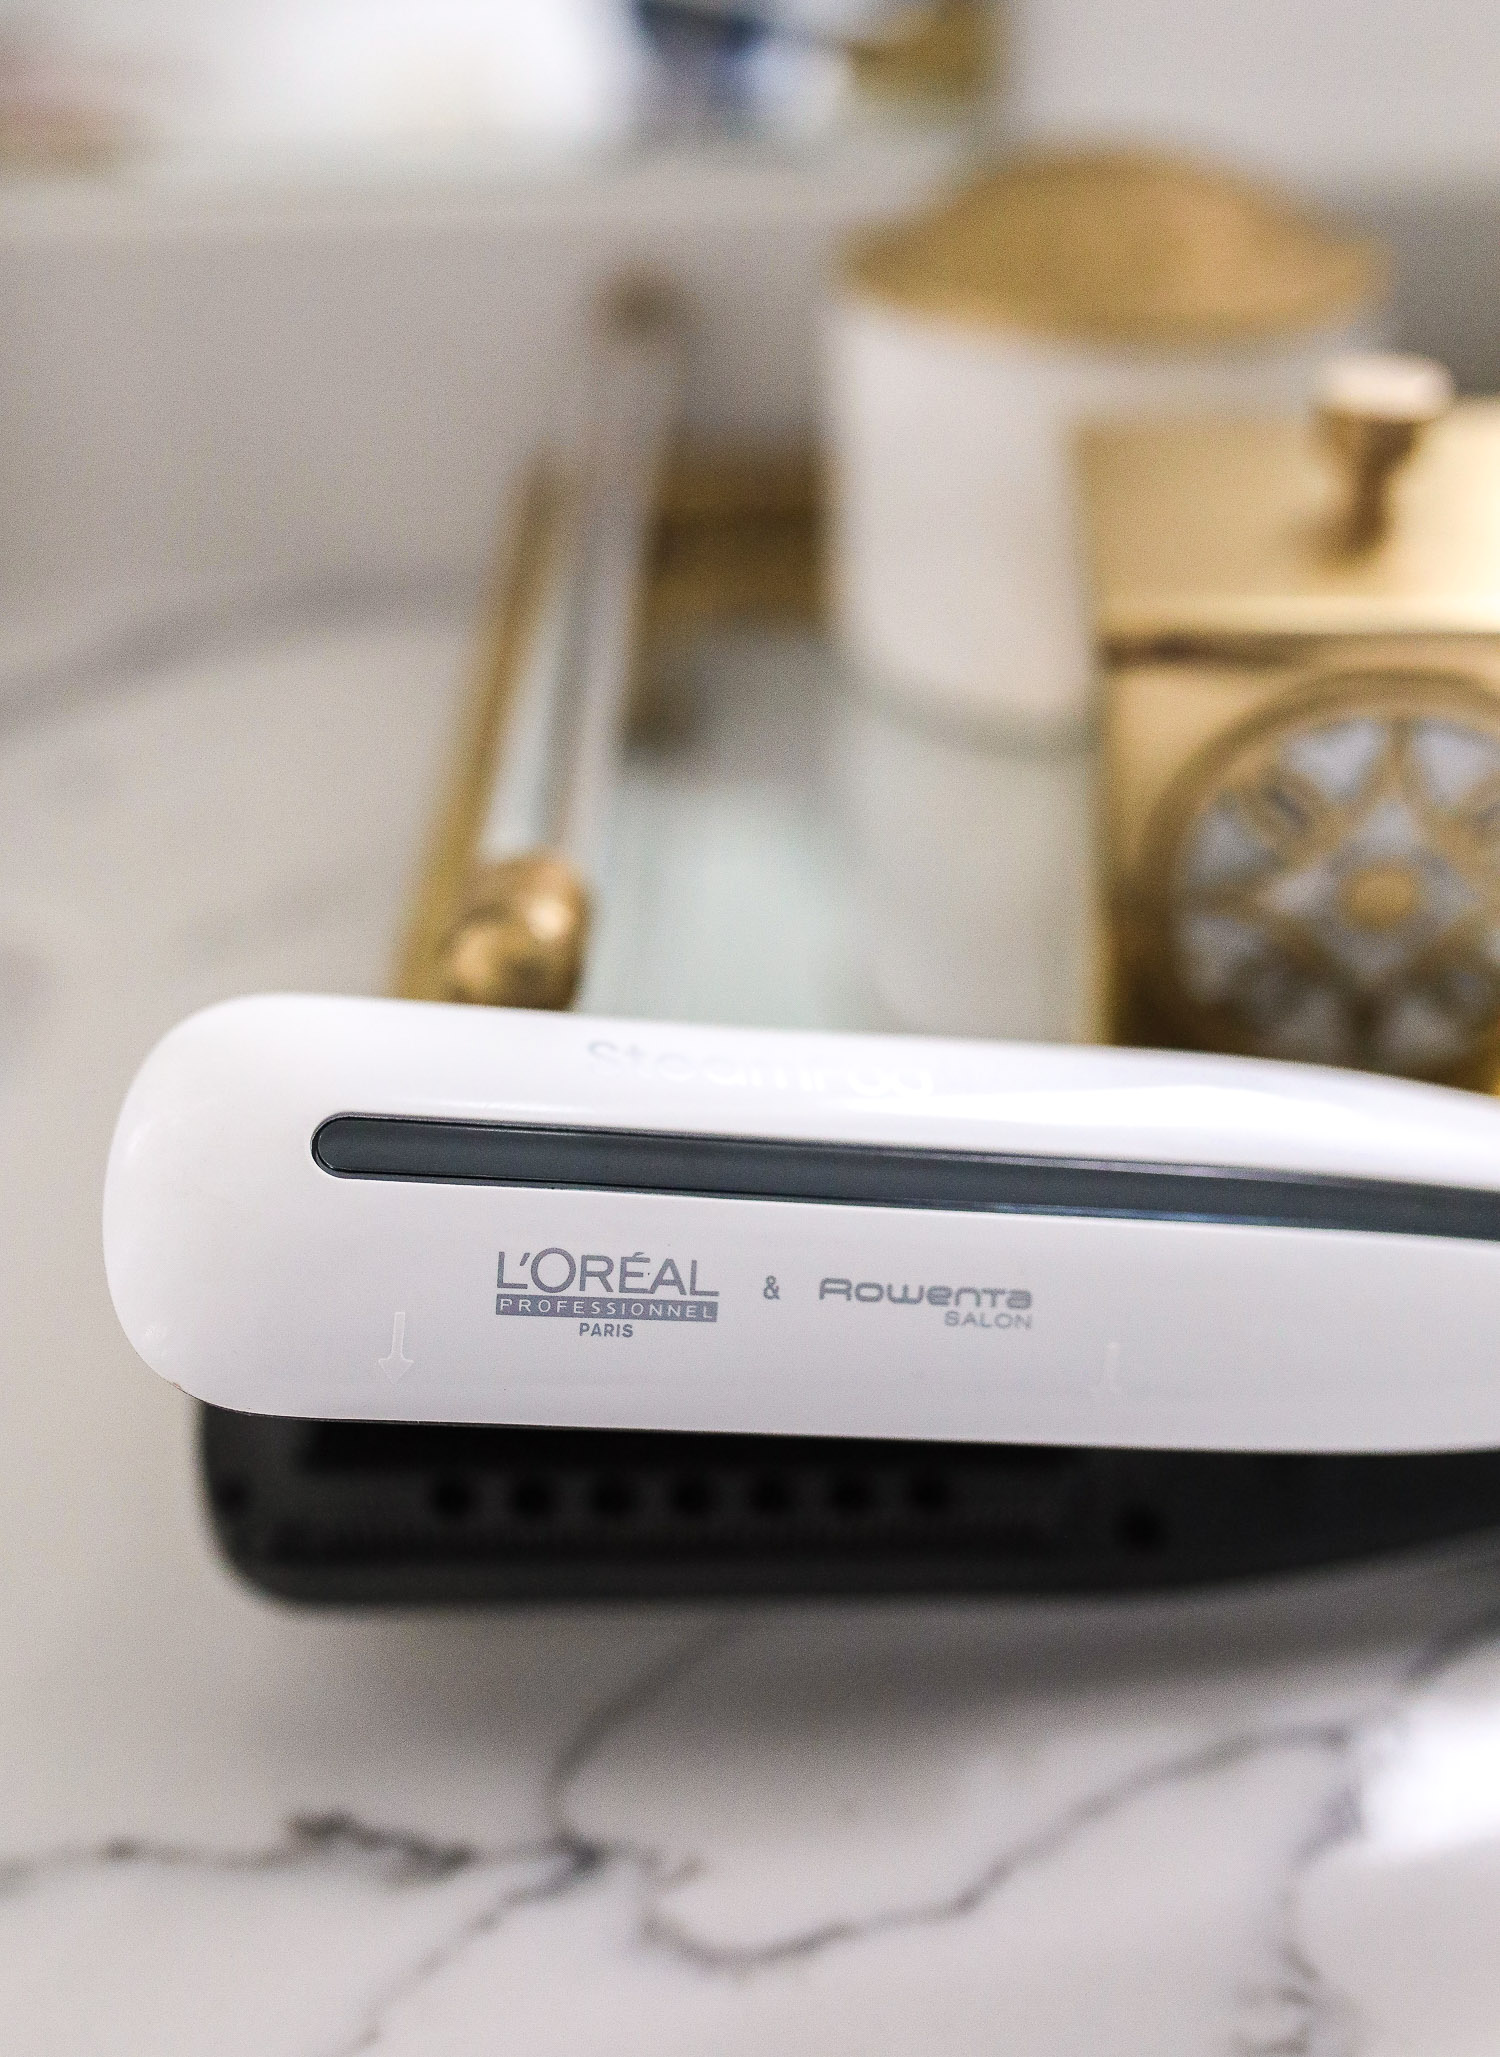 steampod rowenta loreal, steampod Review rowenta, emily gemma, best straighening product, The Sweetest Thing blog hair | L'oreal Professional Steampod Hair Straightener by popular US beauty blog, The Sweetest Thing: image of a L'oreal Professional Steampod Hair Straightener.